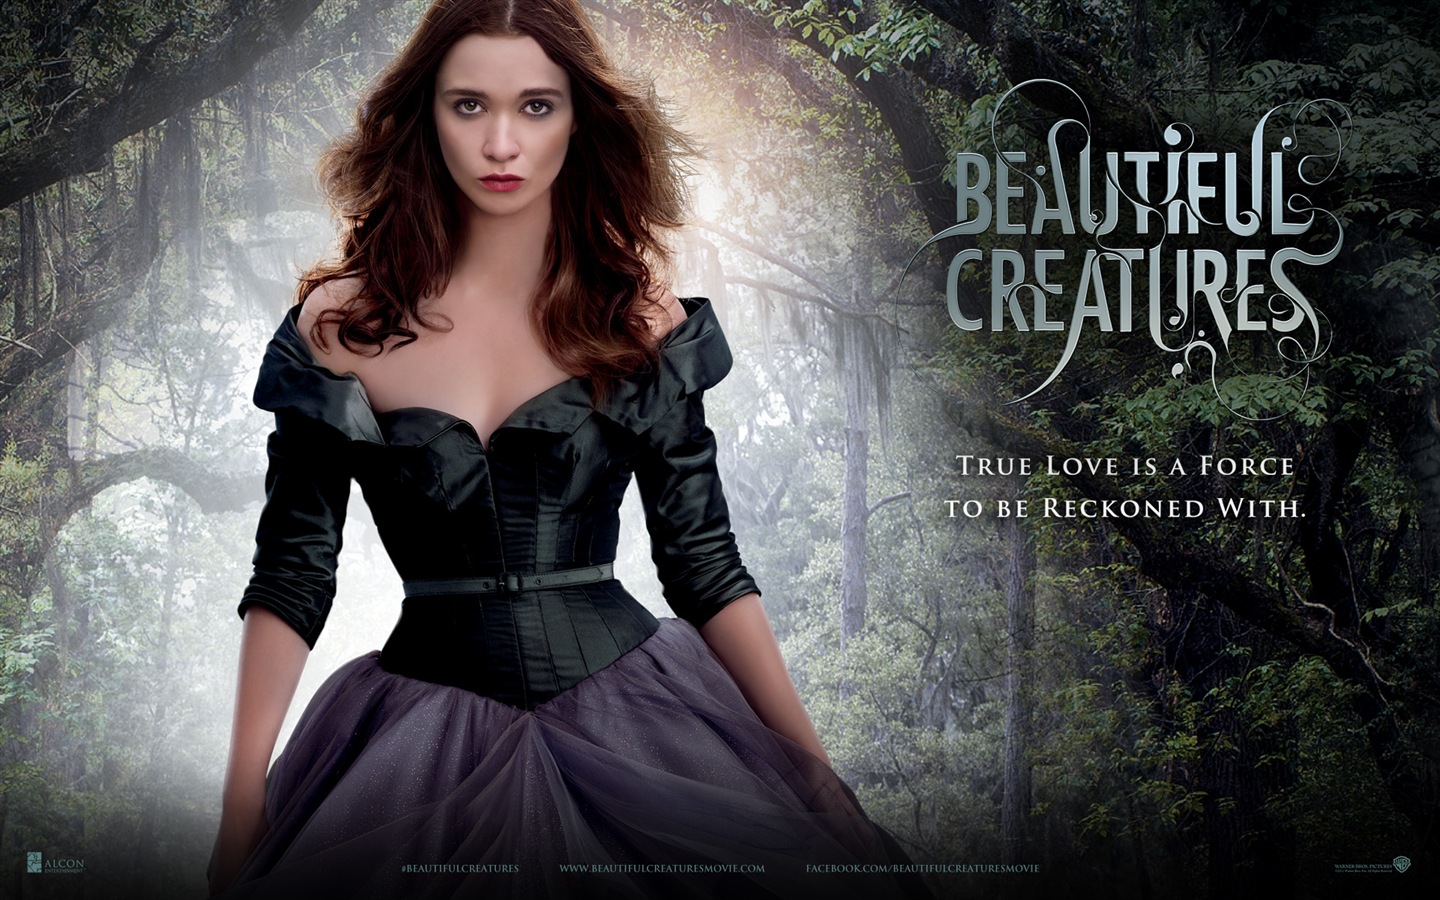 Beautiful Creatures 2013 HD movie wallpapers #7 - 1440x900